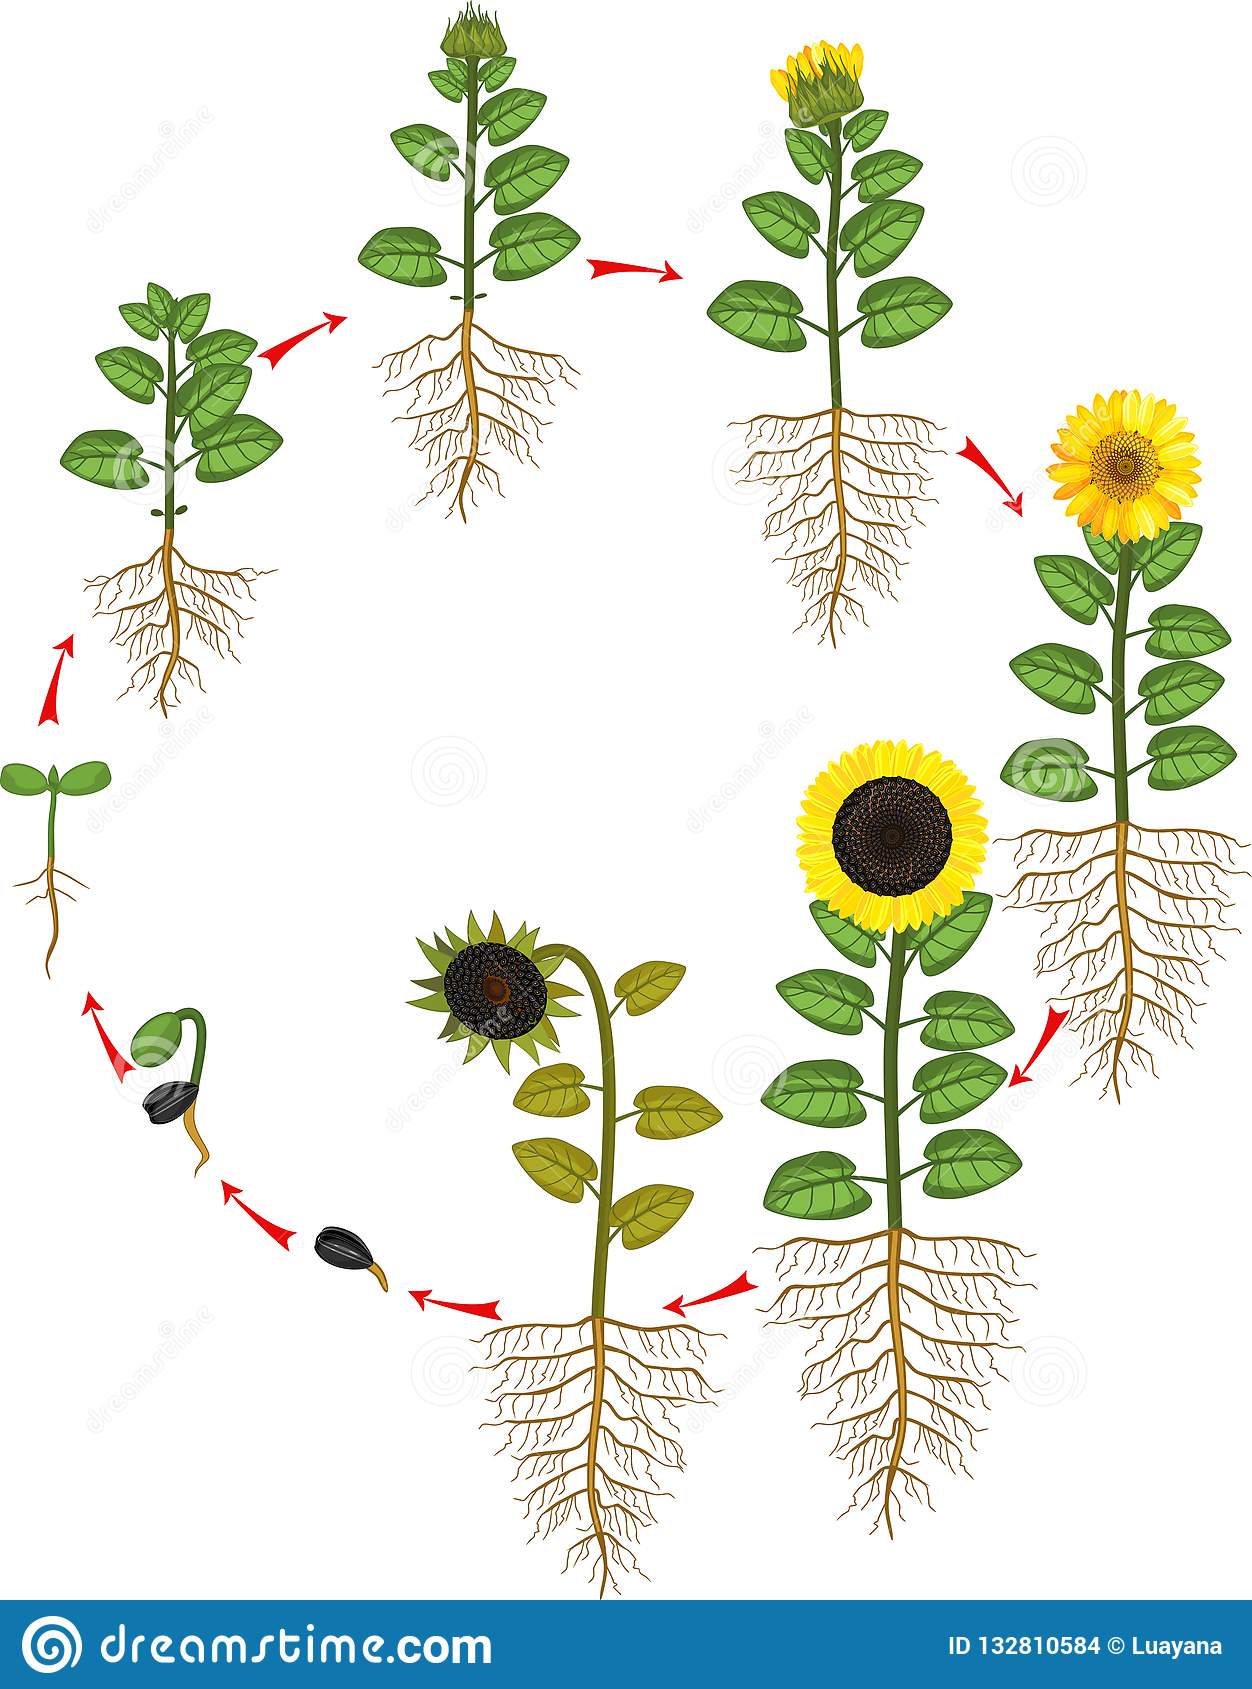 sunflower-life-cycle-growth-stages-seed-to-flowering-fruit-bearing-plant-root-system-sunflower-life-cycle-growth-132810584